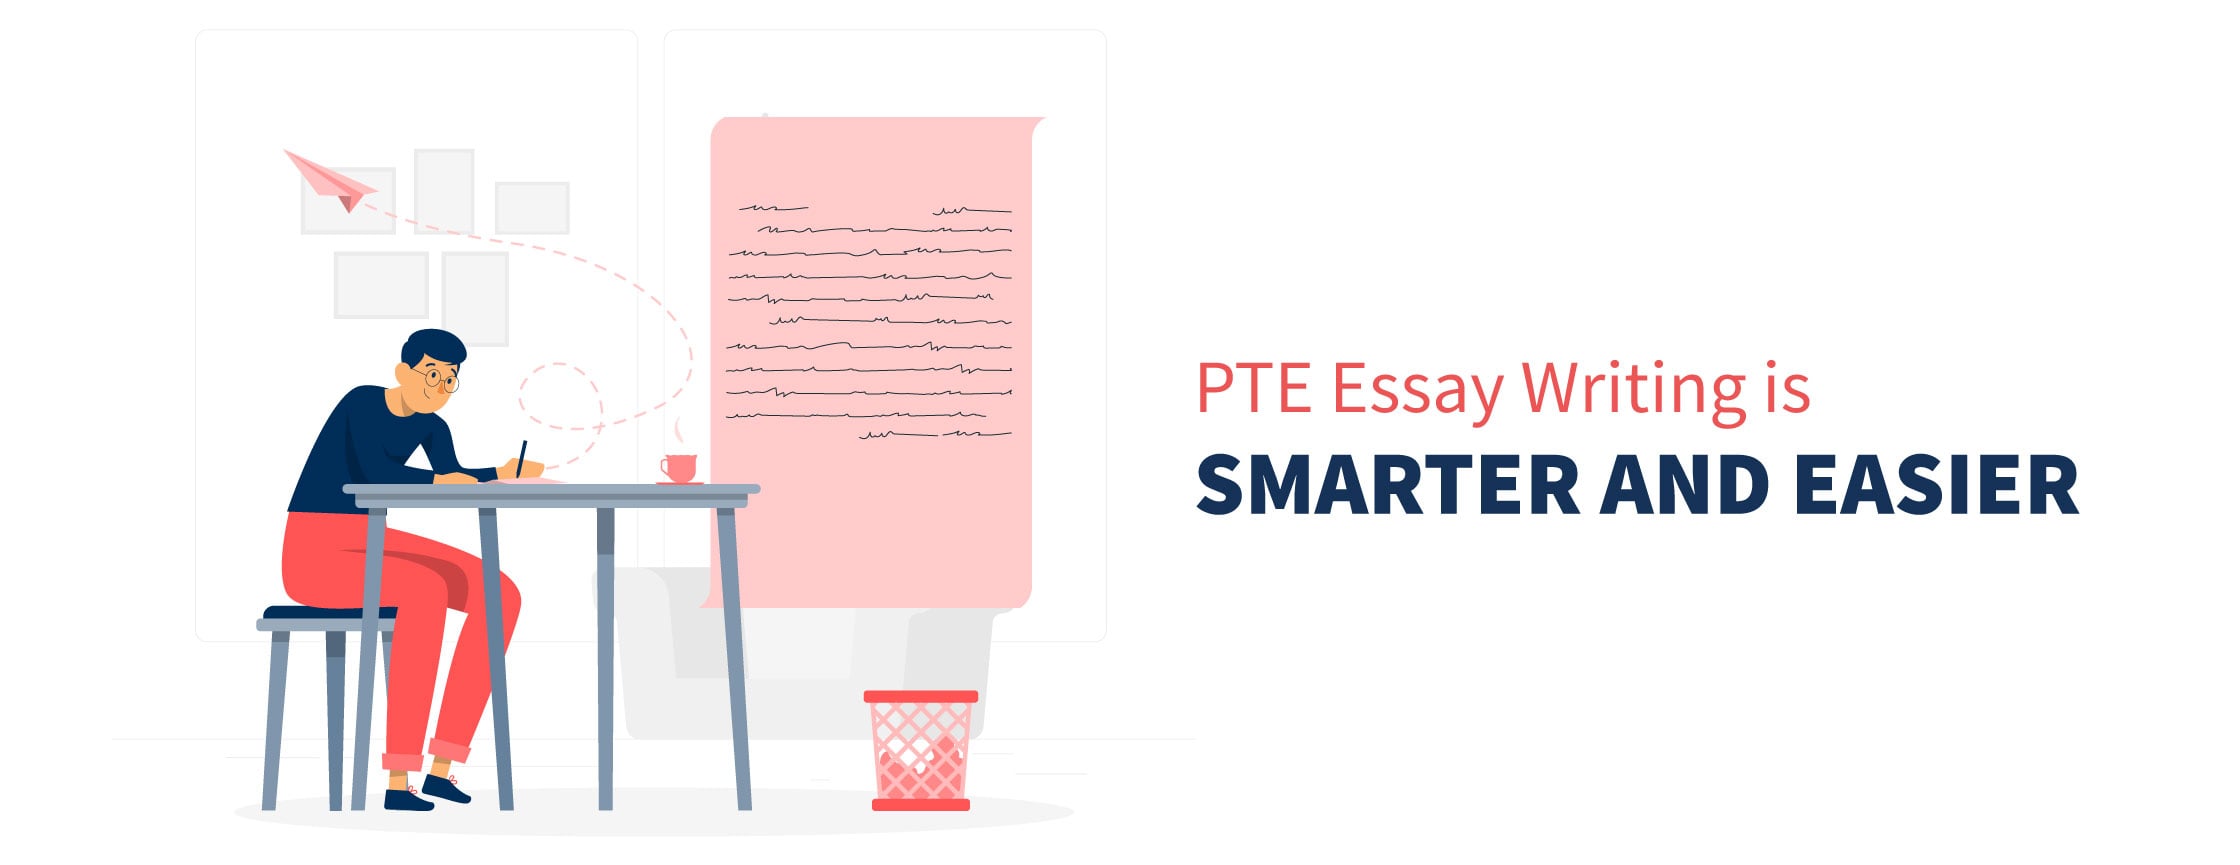 PTE Writing Essays are Smarter